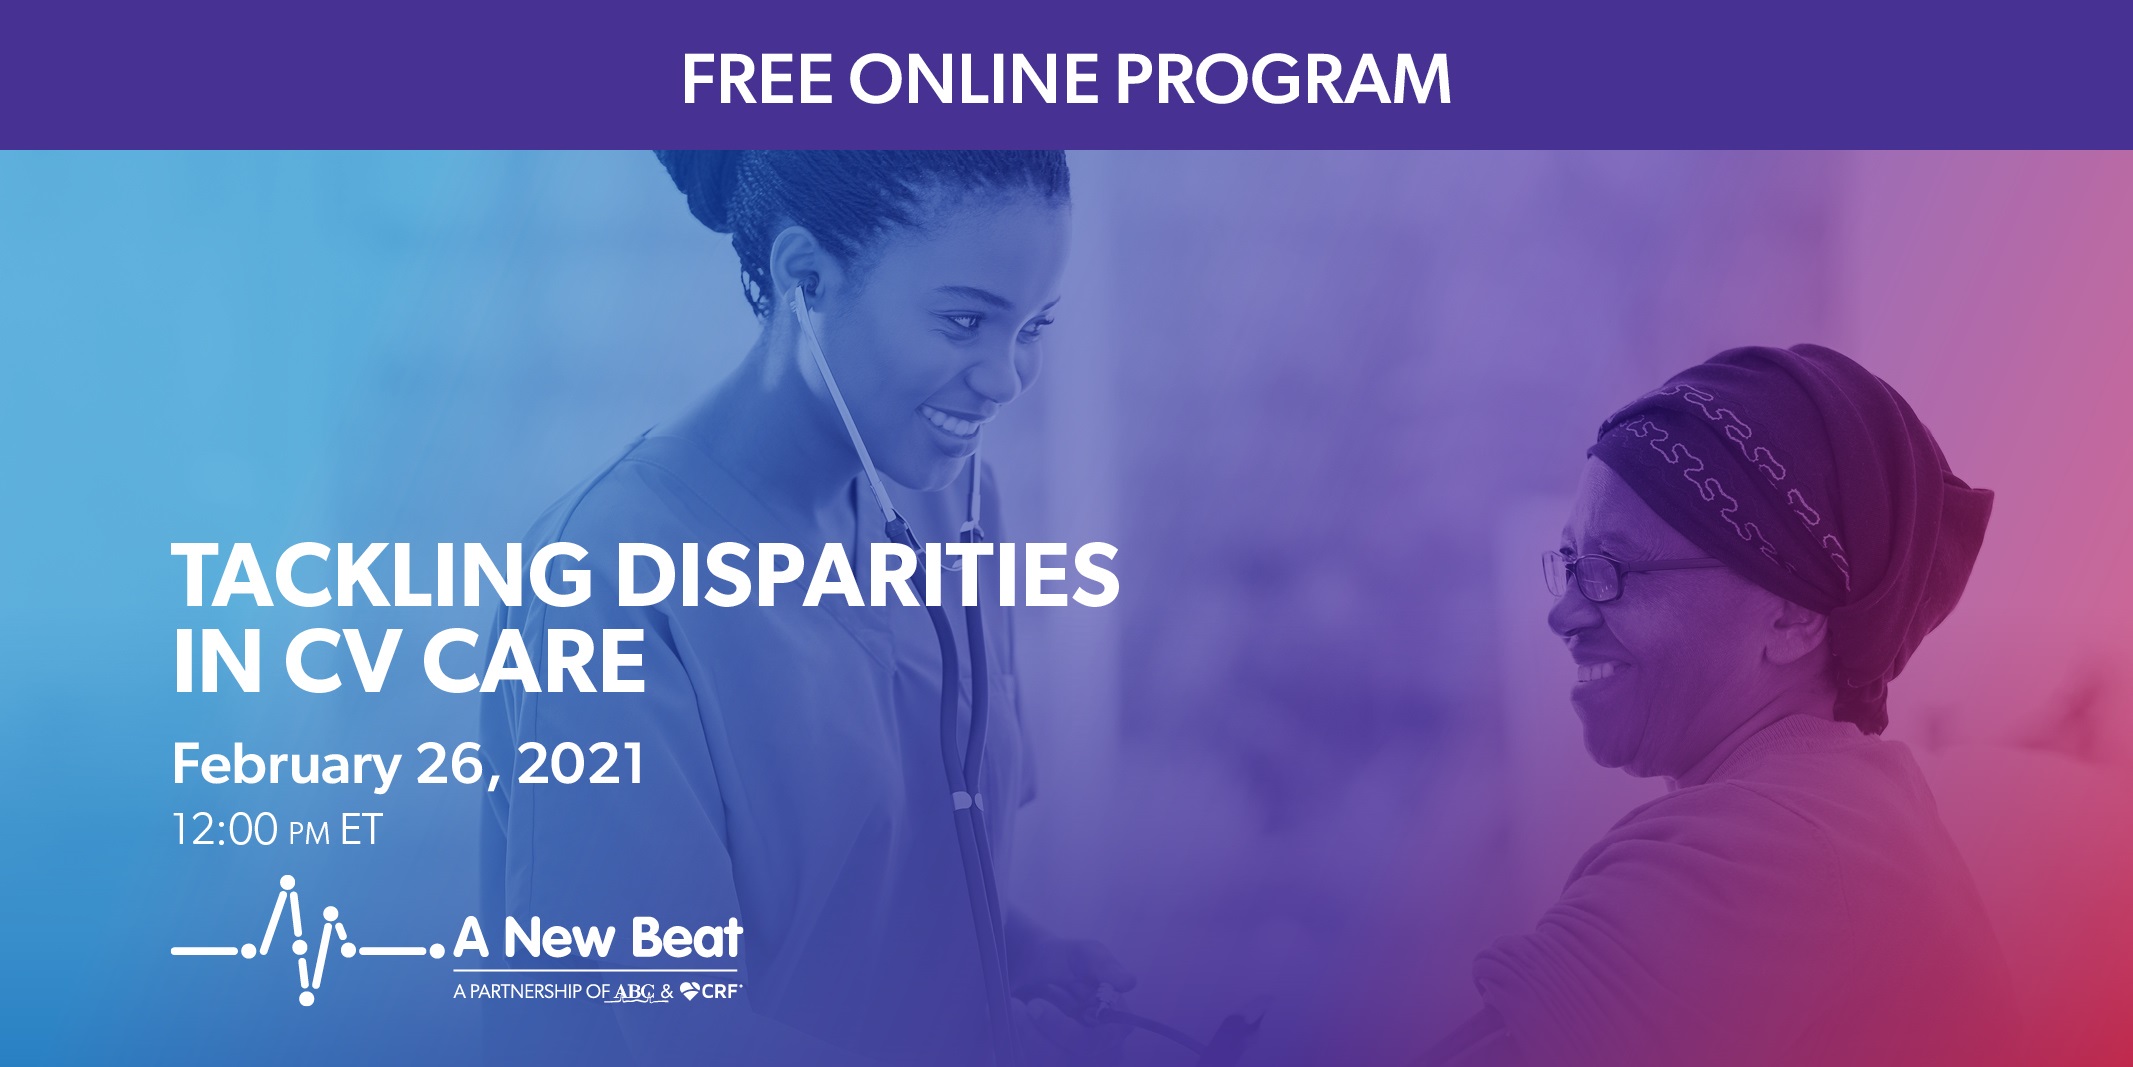 Newswise: A New Beat Offers Free Online Seminar Examining Disparities in Cardiovascular Care During Heart Month